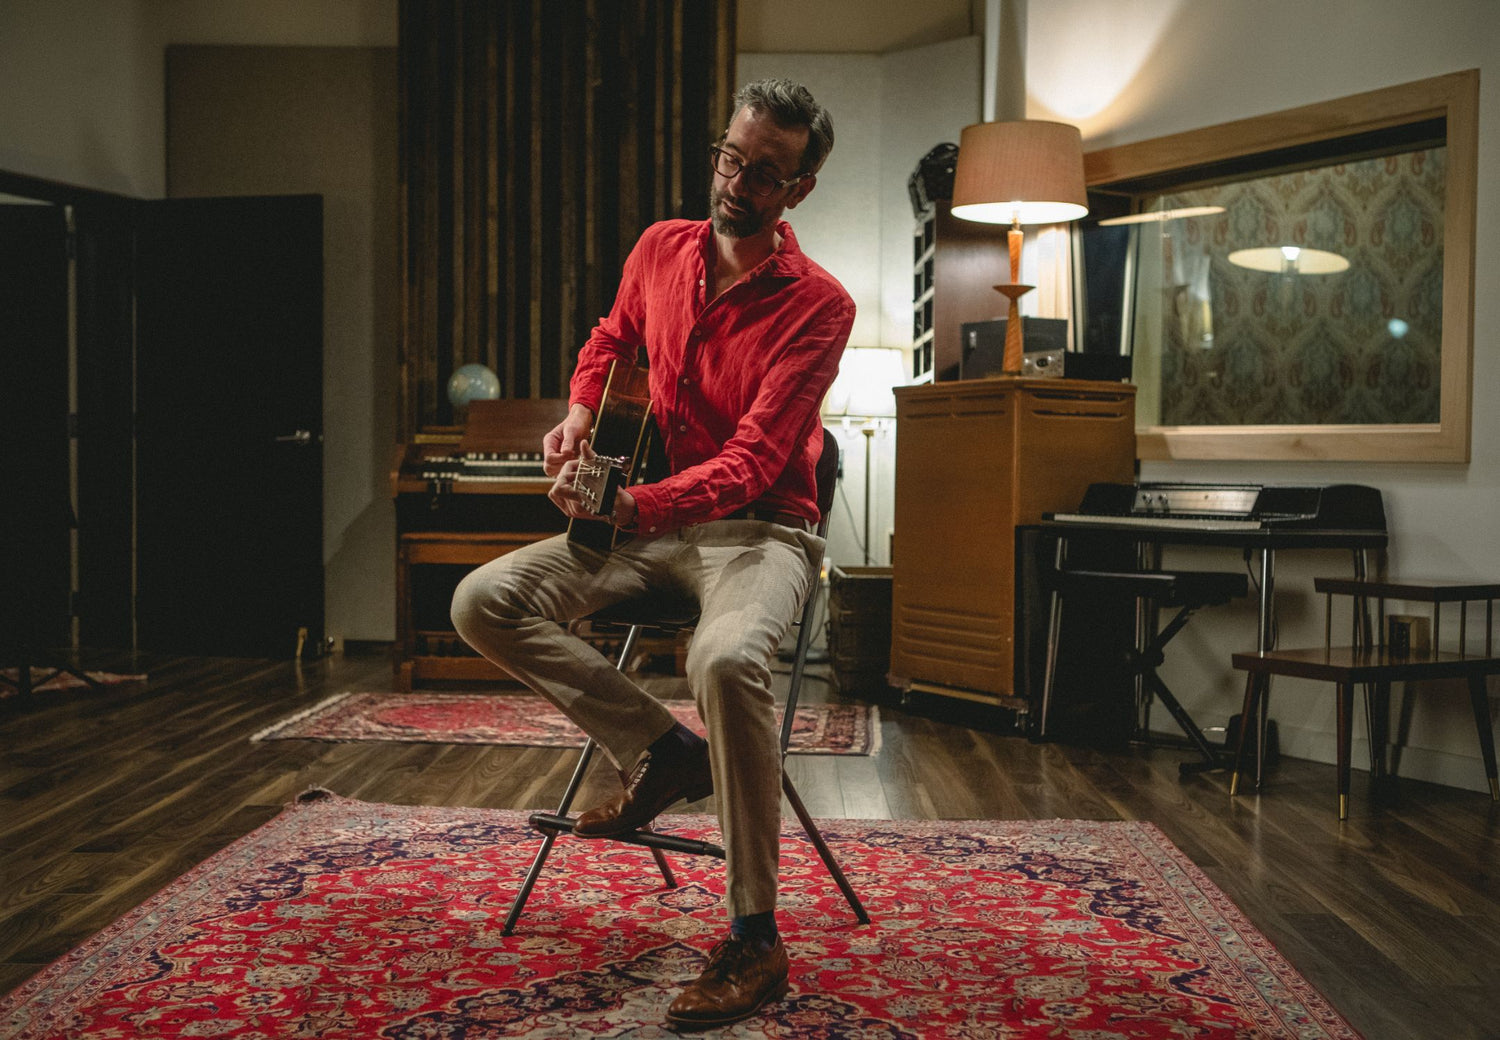 David Myles sitting on a tall chair in the middle of an ornate room with guitar in lap playing in a red shirt and beige trousers. 